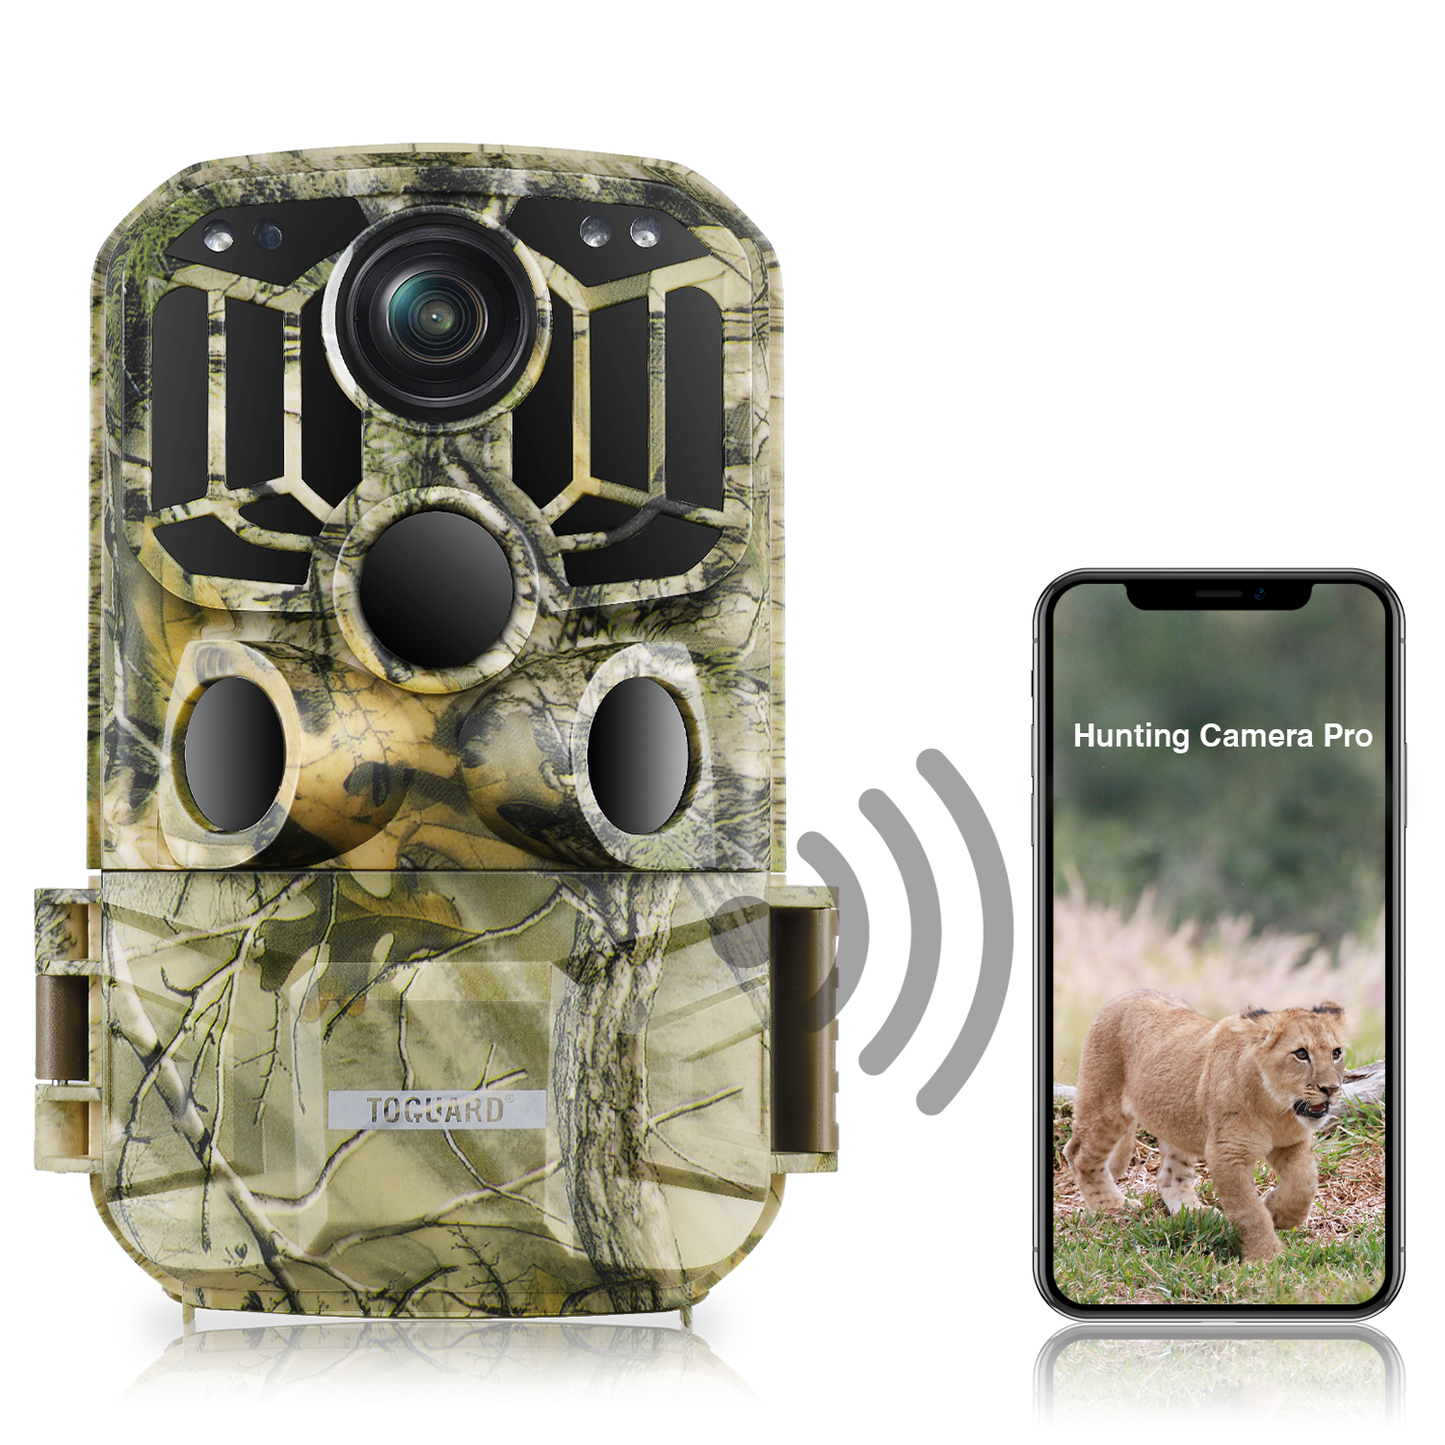 CAMPARK WiFi Bluetooth Trail Camera 24MP 1296P Night Vision Game Camera 3 PIR 0.2s Motion Activated Hunting Deer Camera Waterproof IP66 for Monitoring Outdoor Wildlife Trail Cam 2.0" LCD